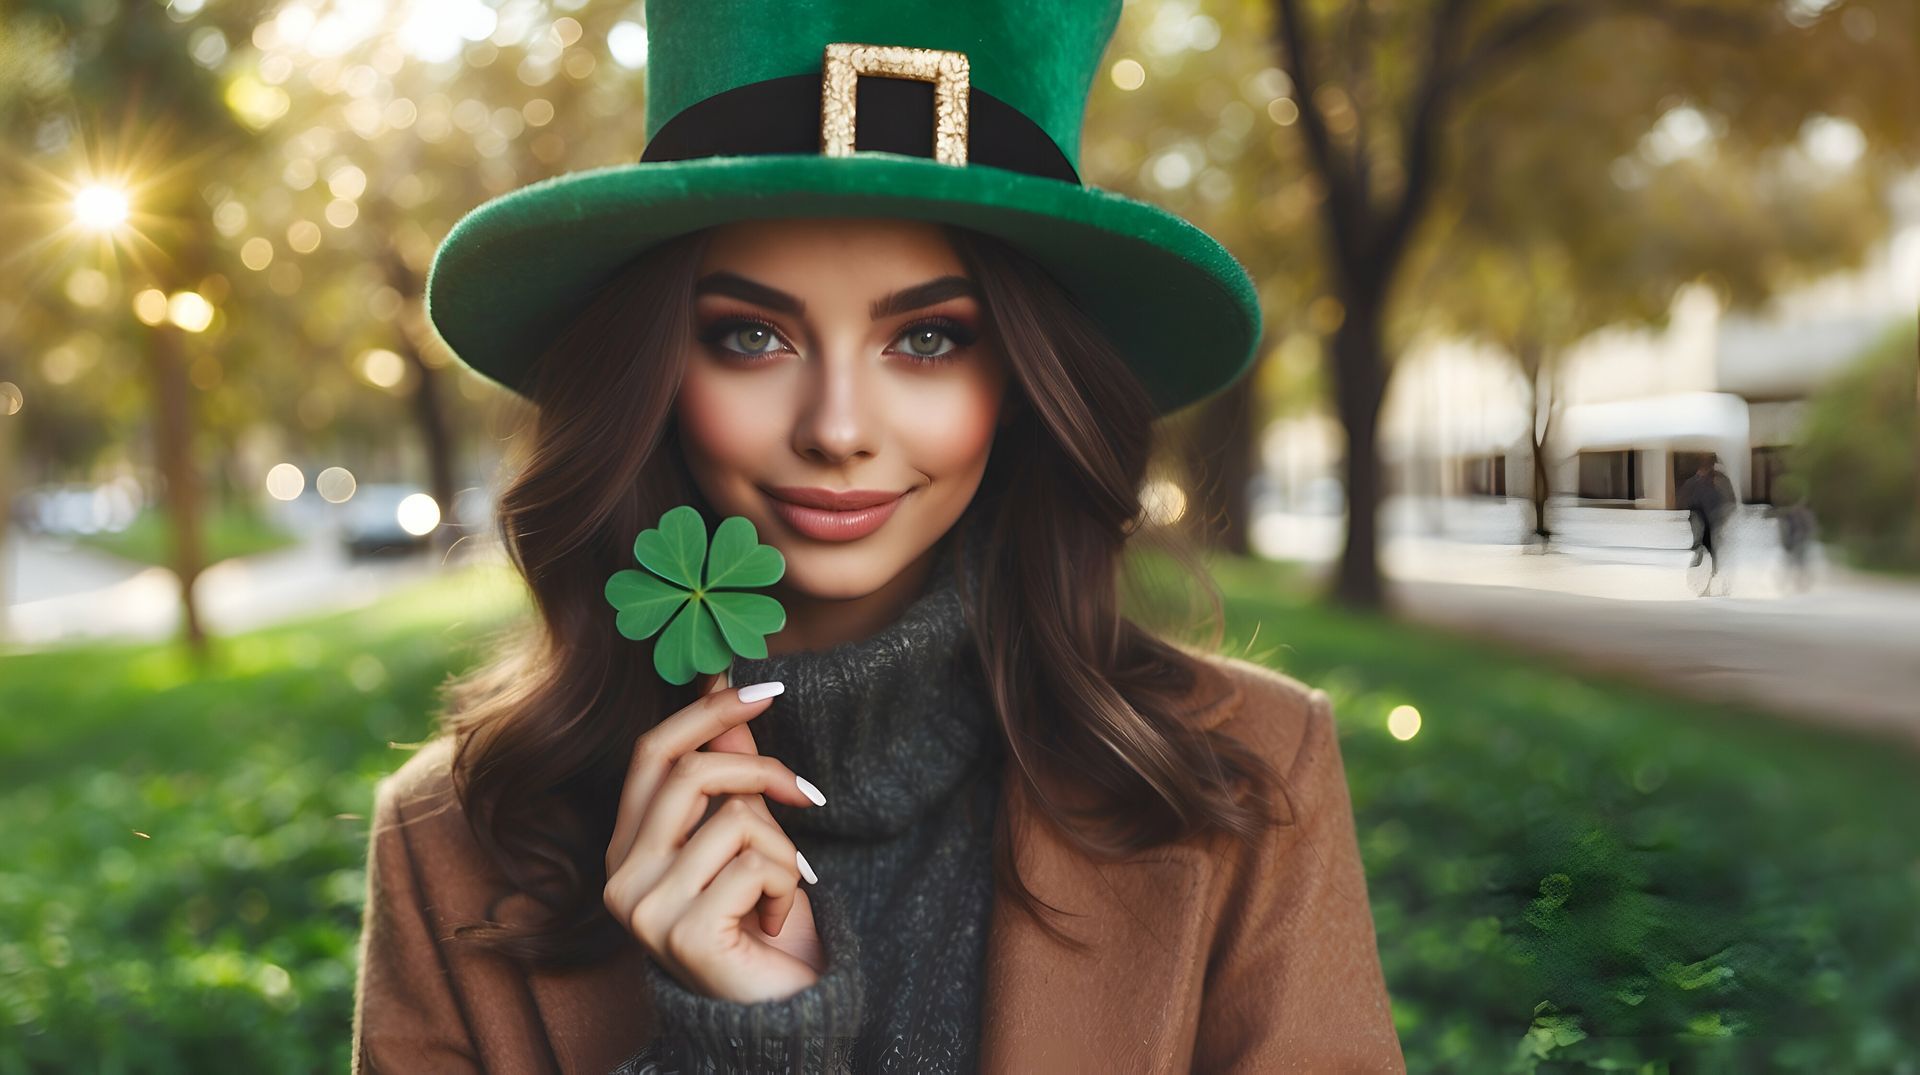 Irish redhead girl with beautiful eyes wearing St Patrick's Day Hat and holding a clover leaf